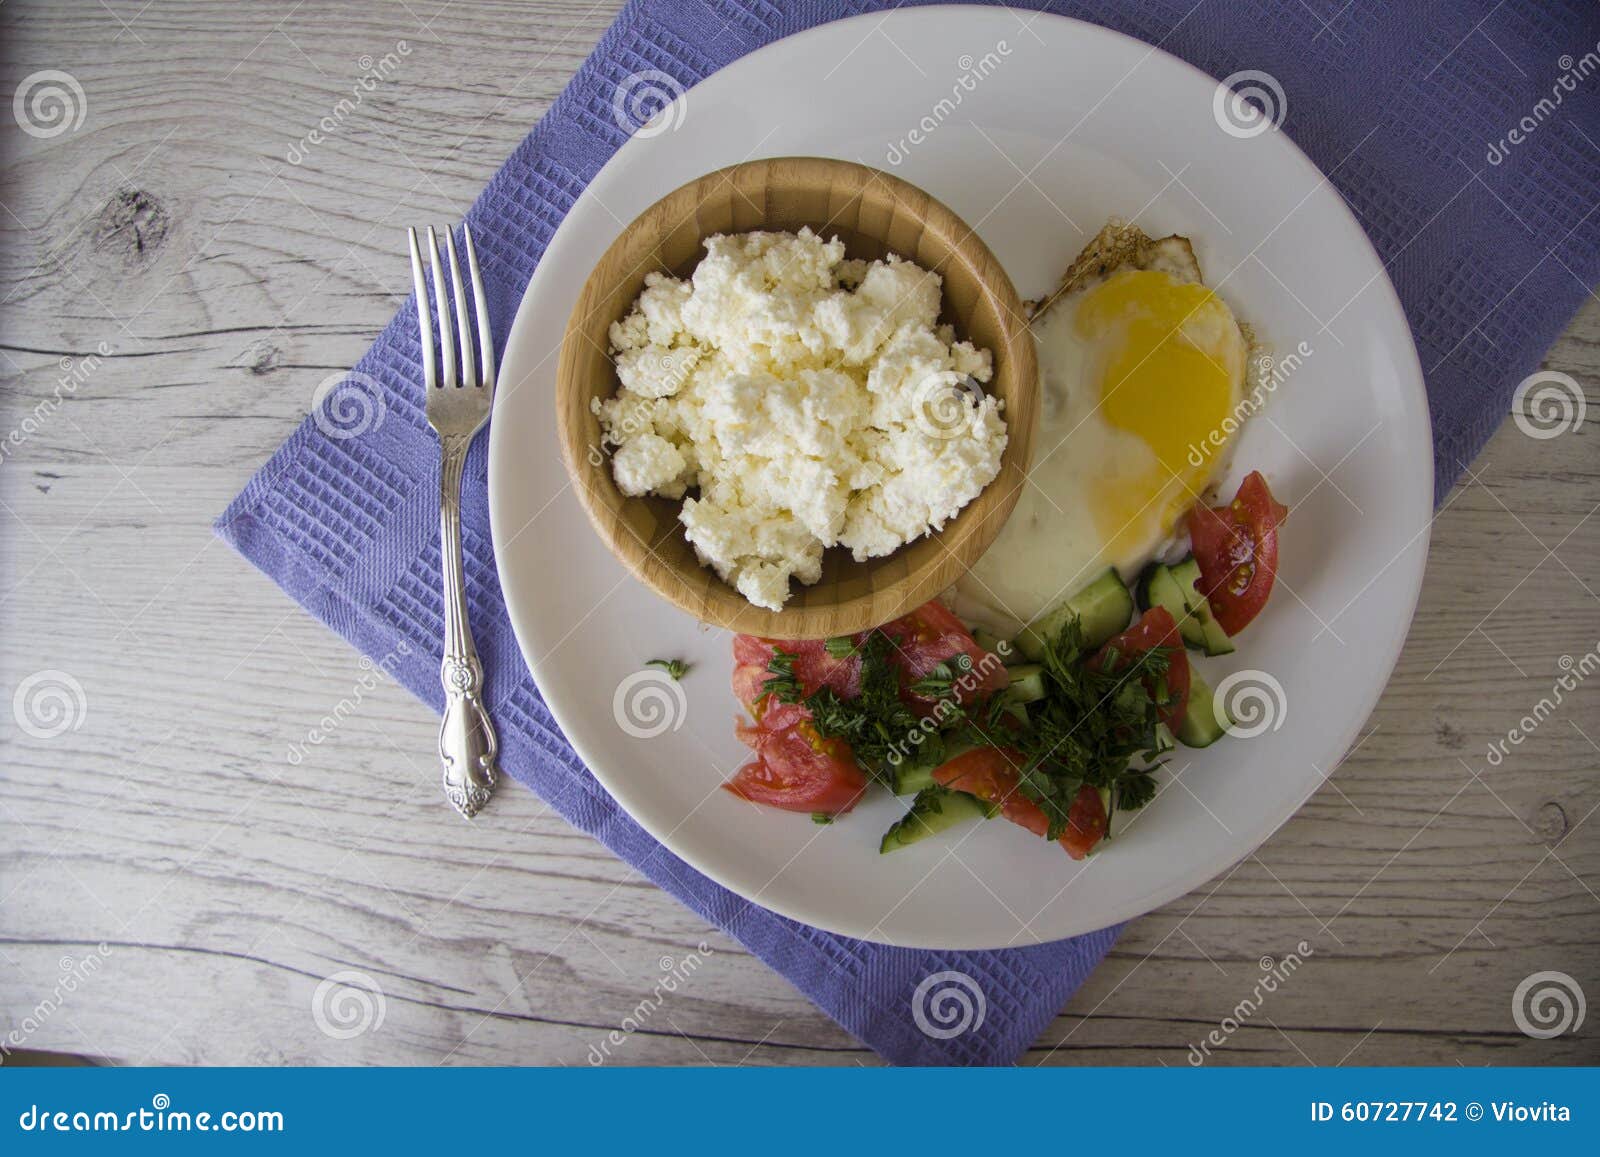 Cottage Cheese And Scrambled Eggs Stock Photo Image Of Brunch